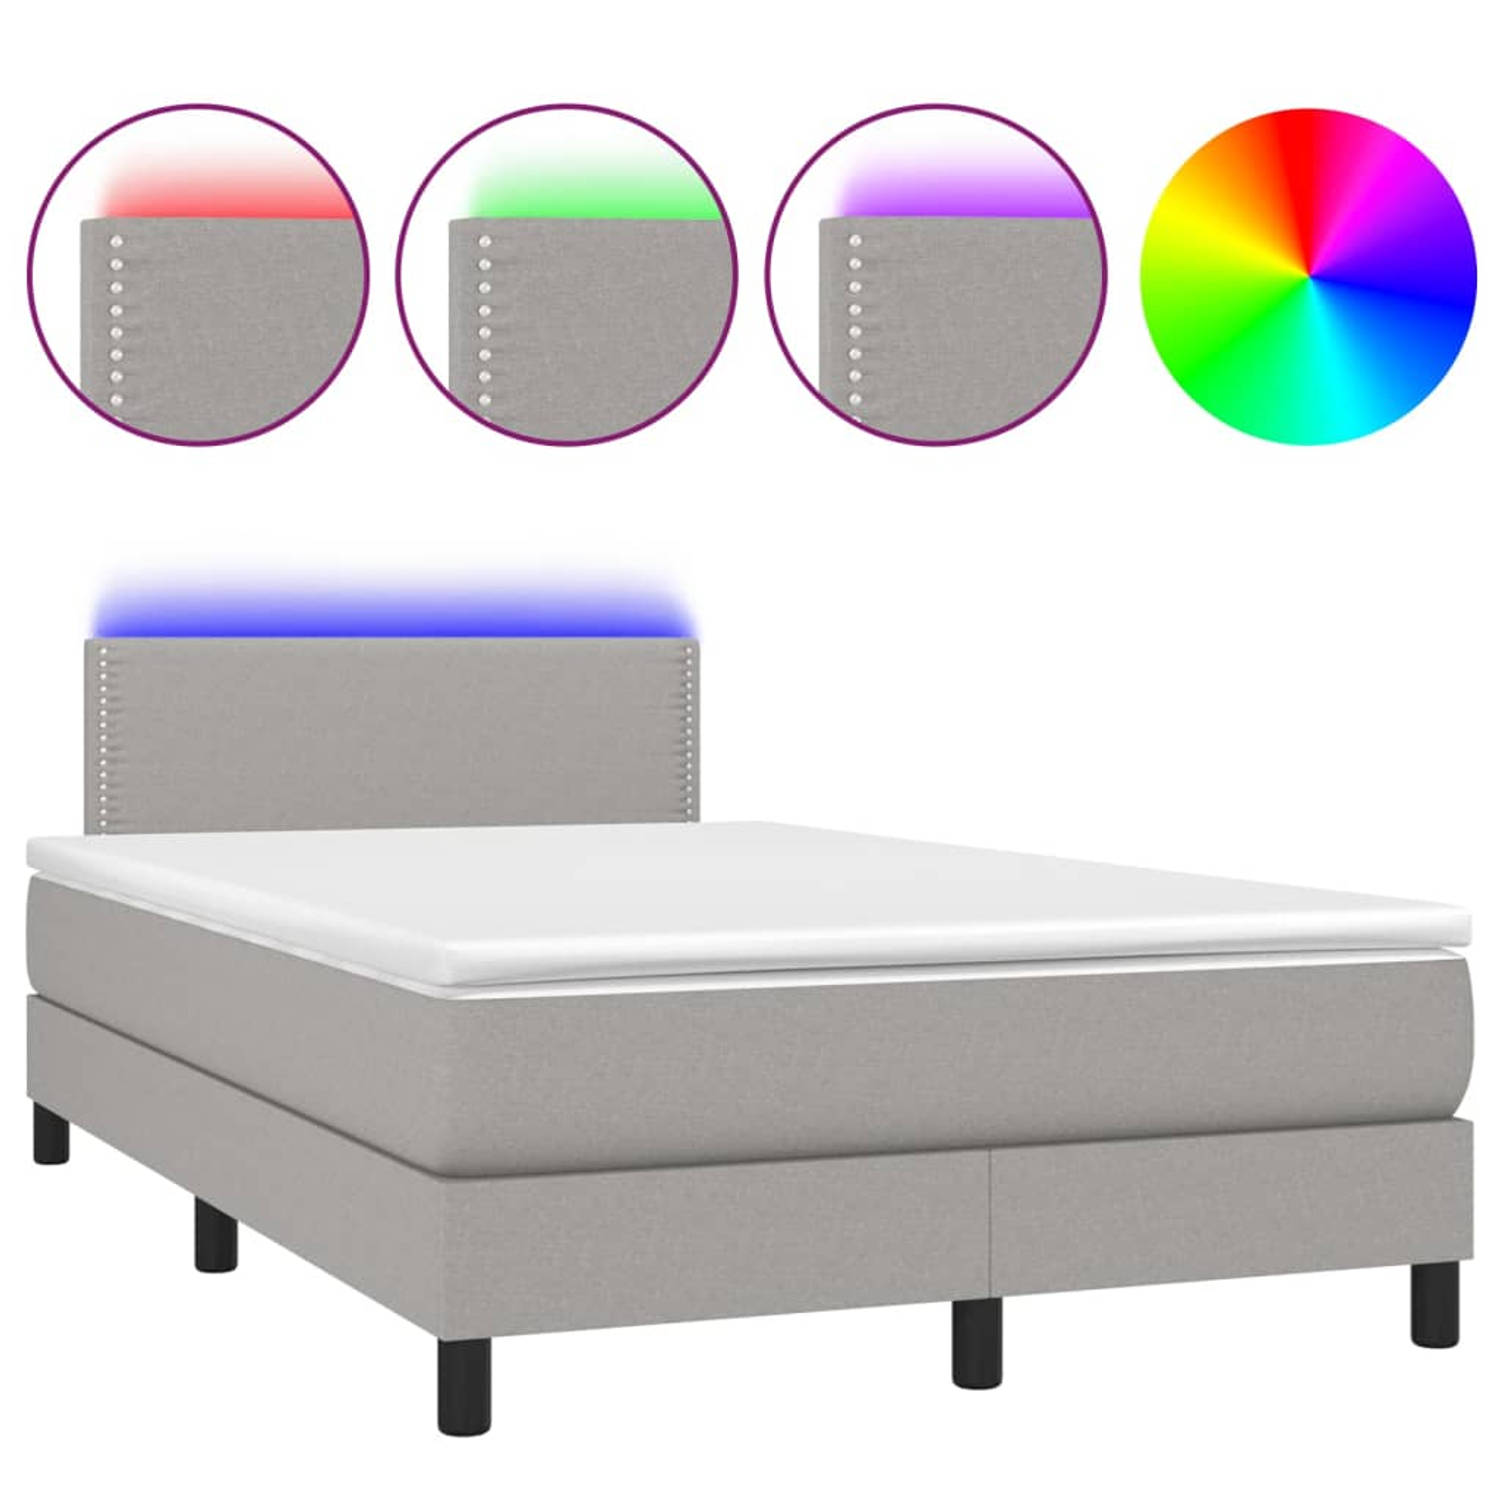 The Living Store Boxspring met matras en LED stof lichtgrijs 120x200 cm - Boxspring - Boxsprings - Bed - Slaapmeubel - Boxspringbed - Boxspring Bed - Tweepersoonsbed - Bed Met Matr